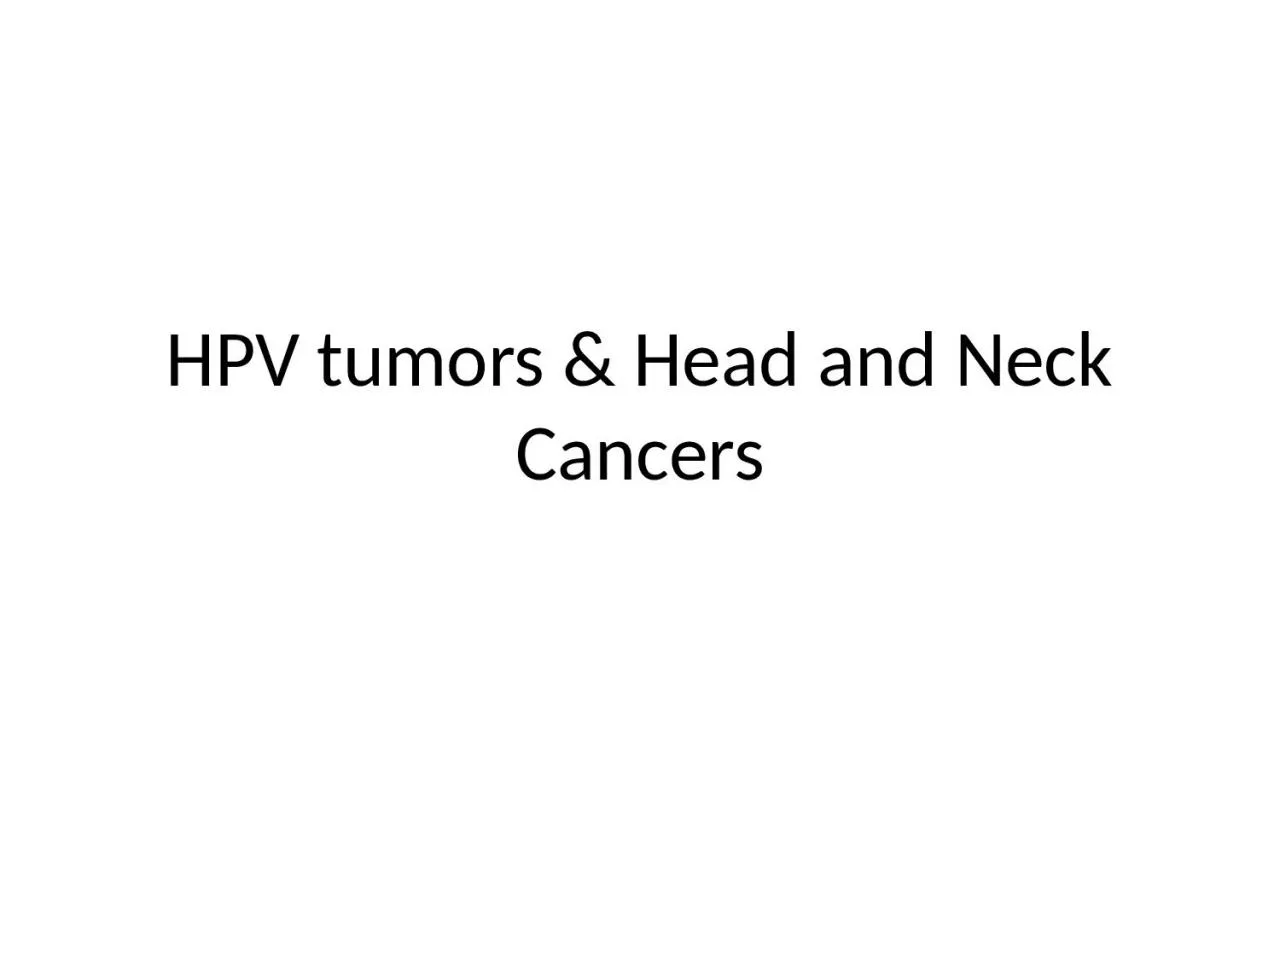 HPV tumors & Head and Neck Cancers